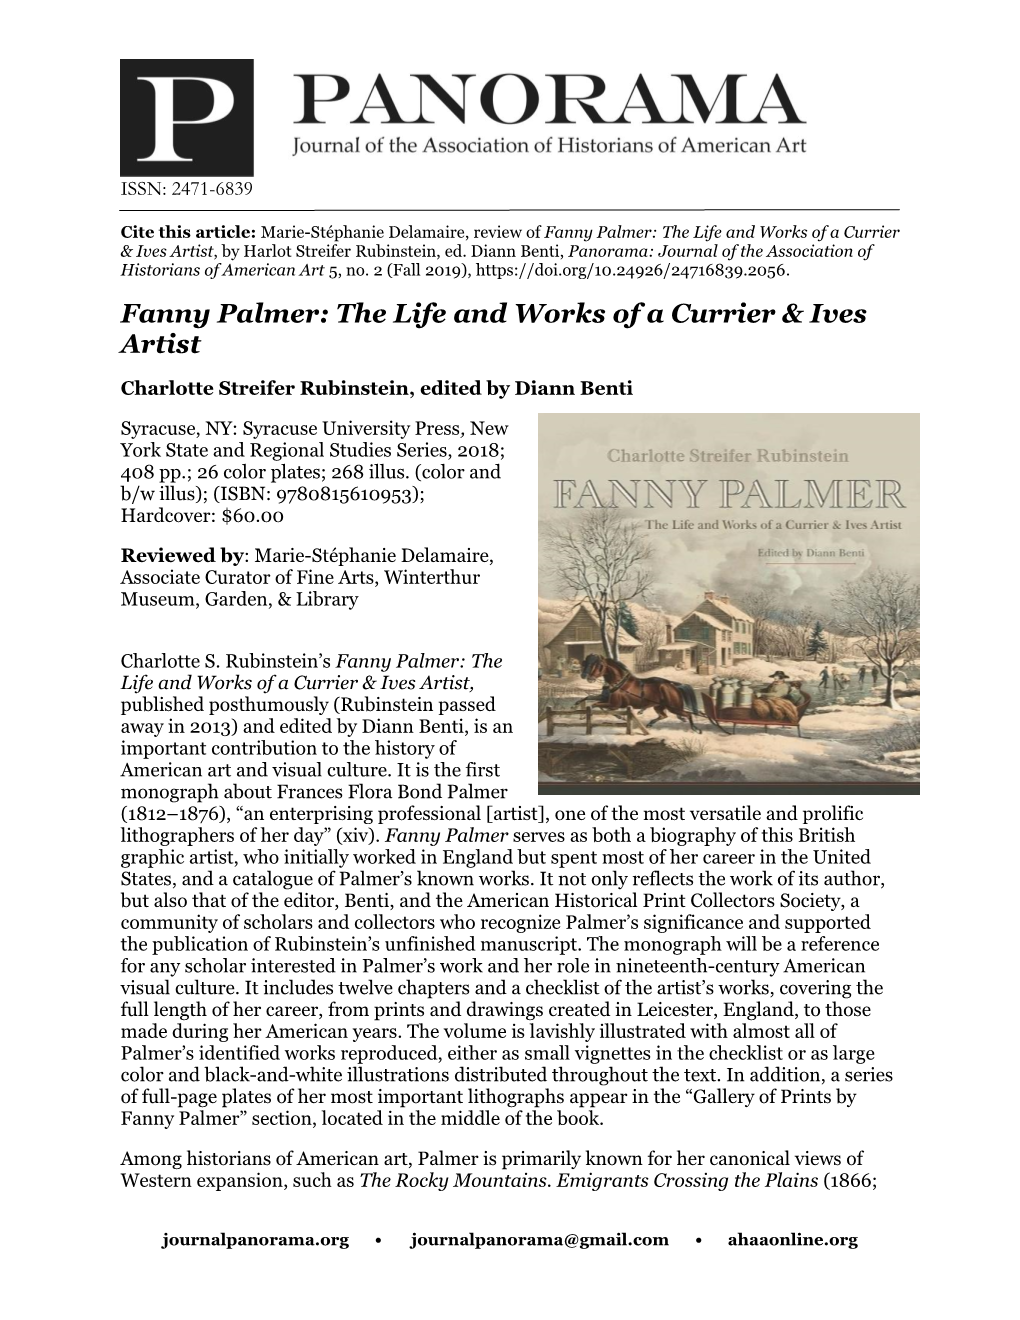 Fanny Palmer: the Life and Works of a Currier & Ives Artist, by Harlot Streifer Rubinstein, Ed